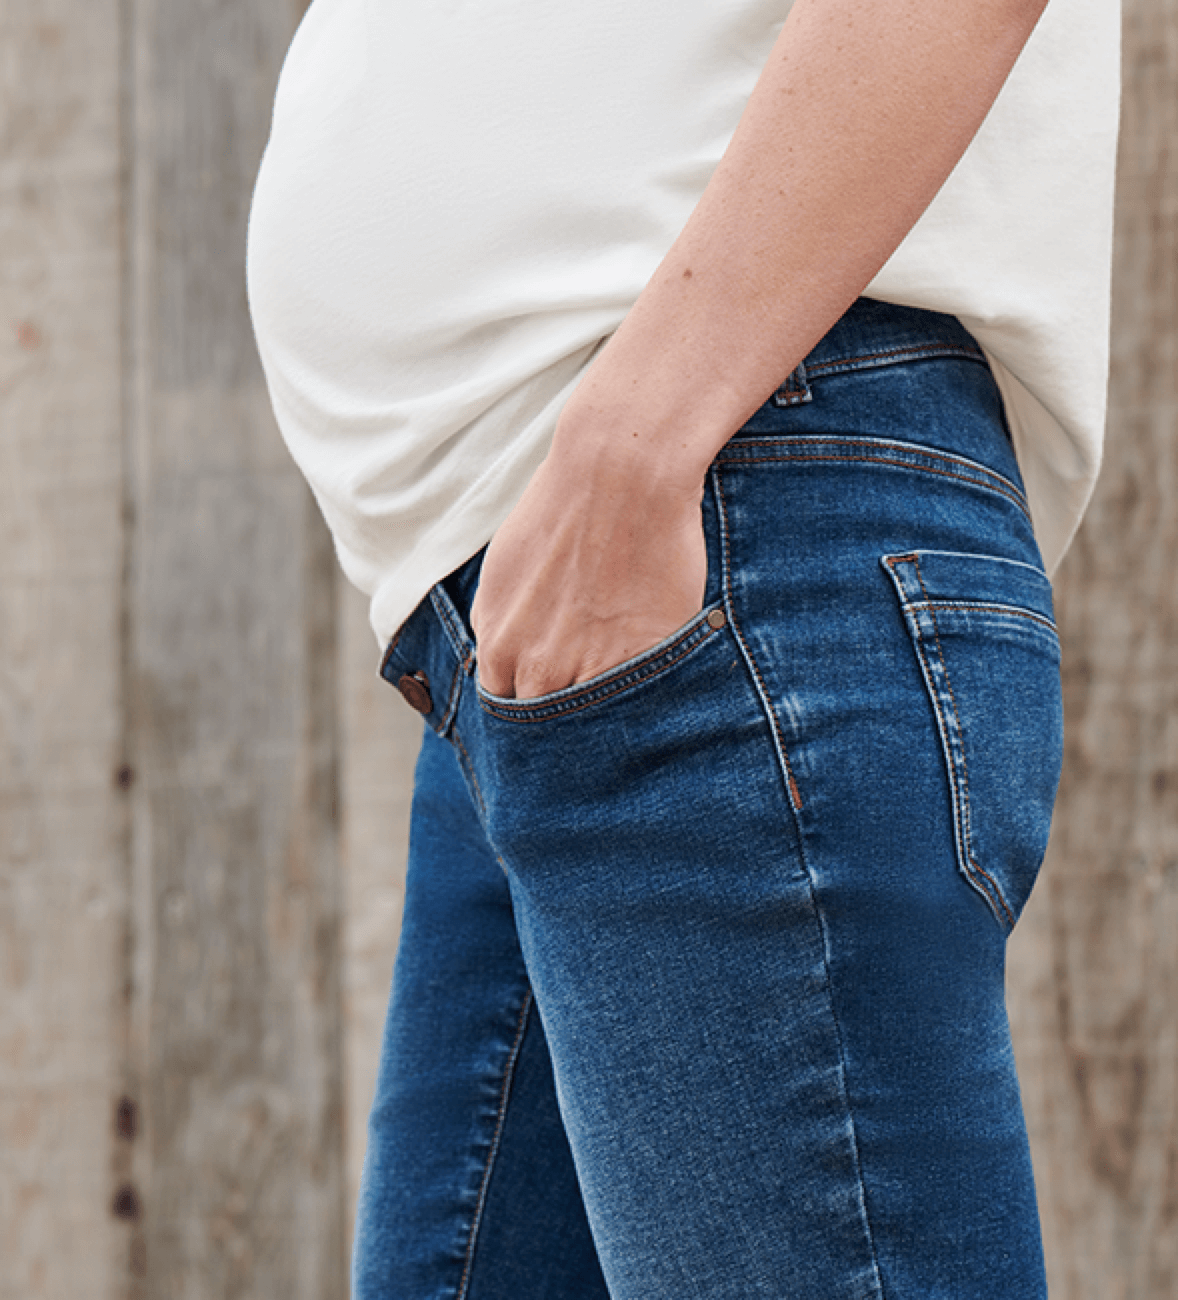 First Trimester Styling Tips (How to Style, What To Buy) - The Mom Edit